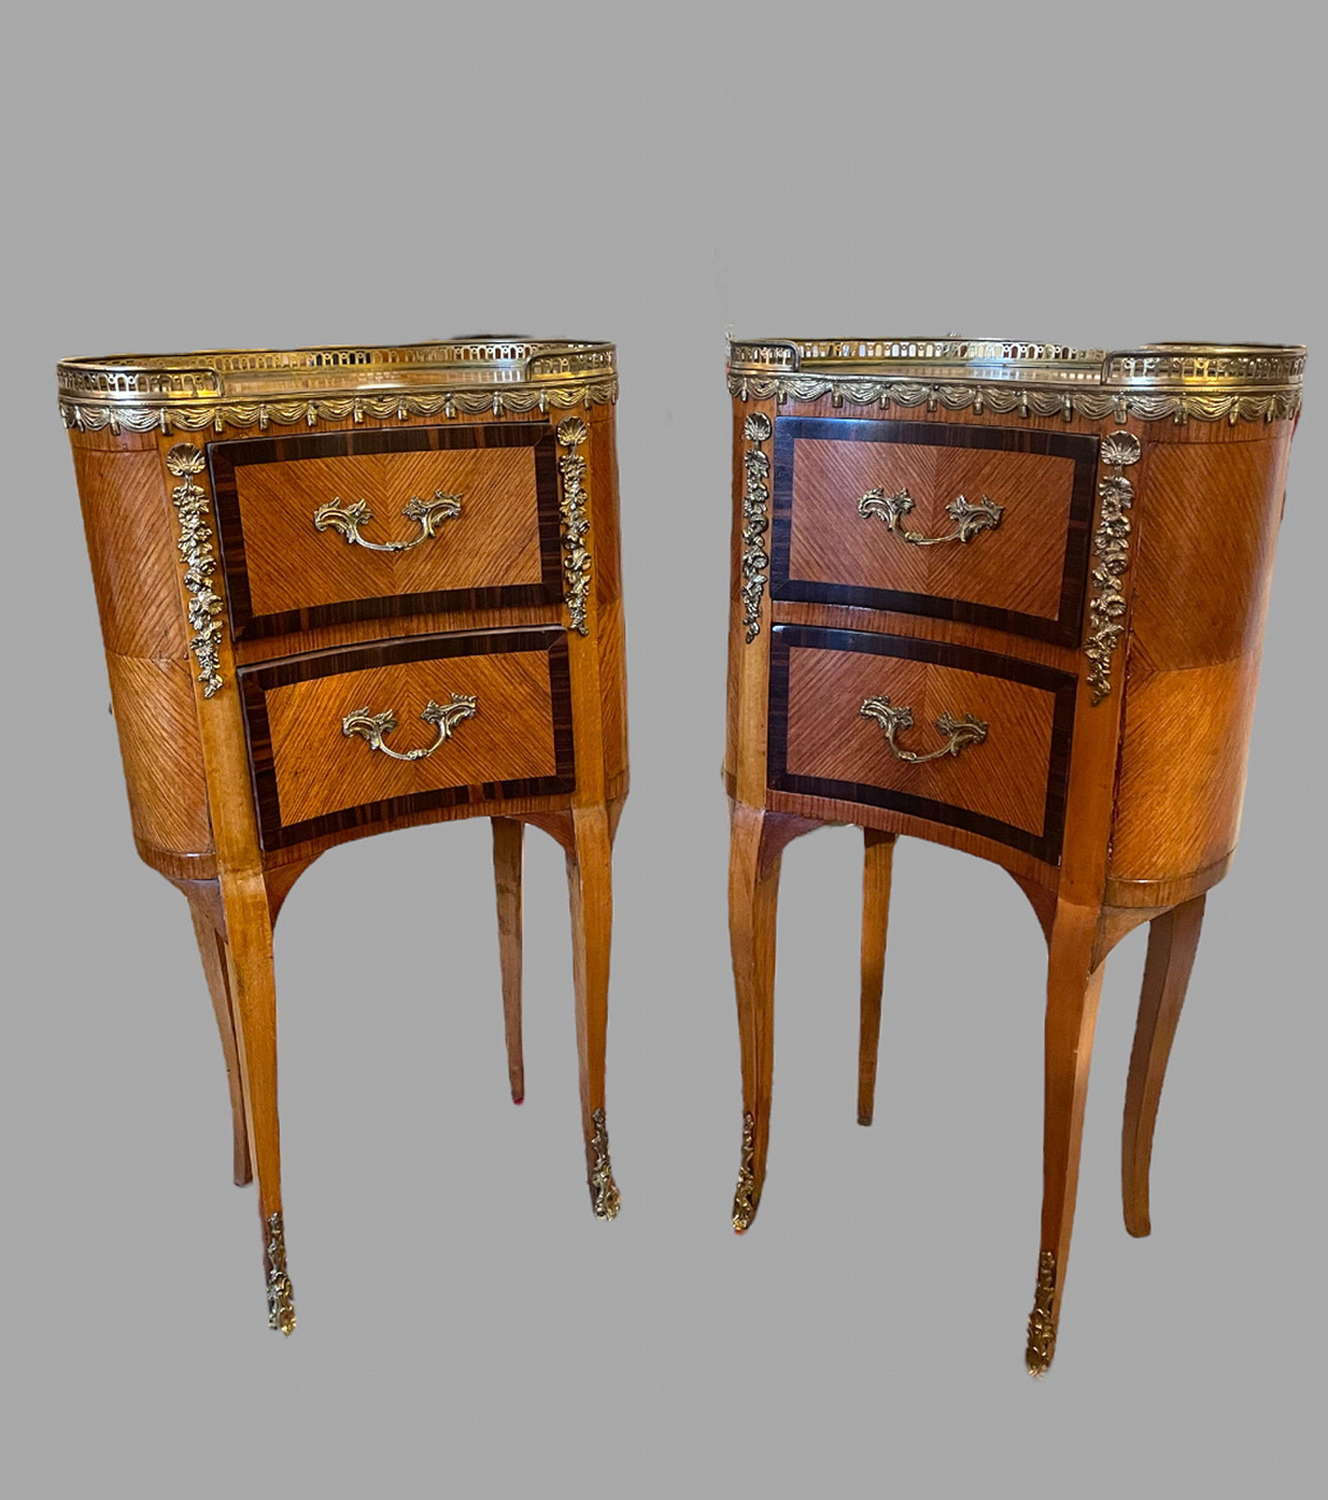 A Pair of Attractive 19thc Marquetry Bedside Tables